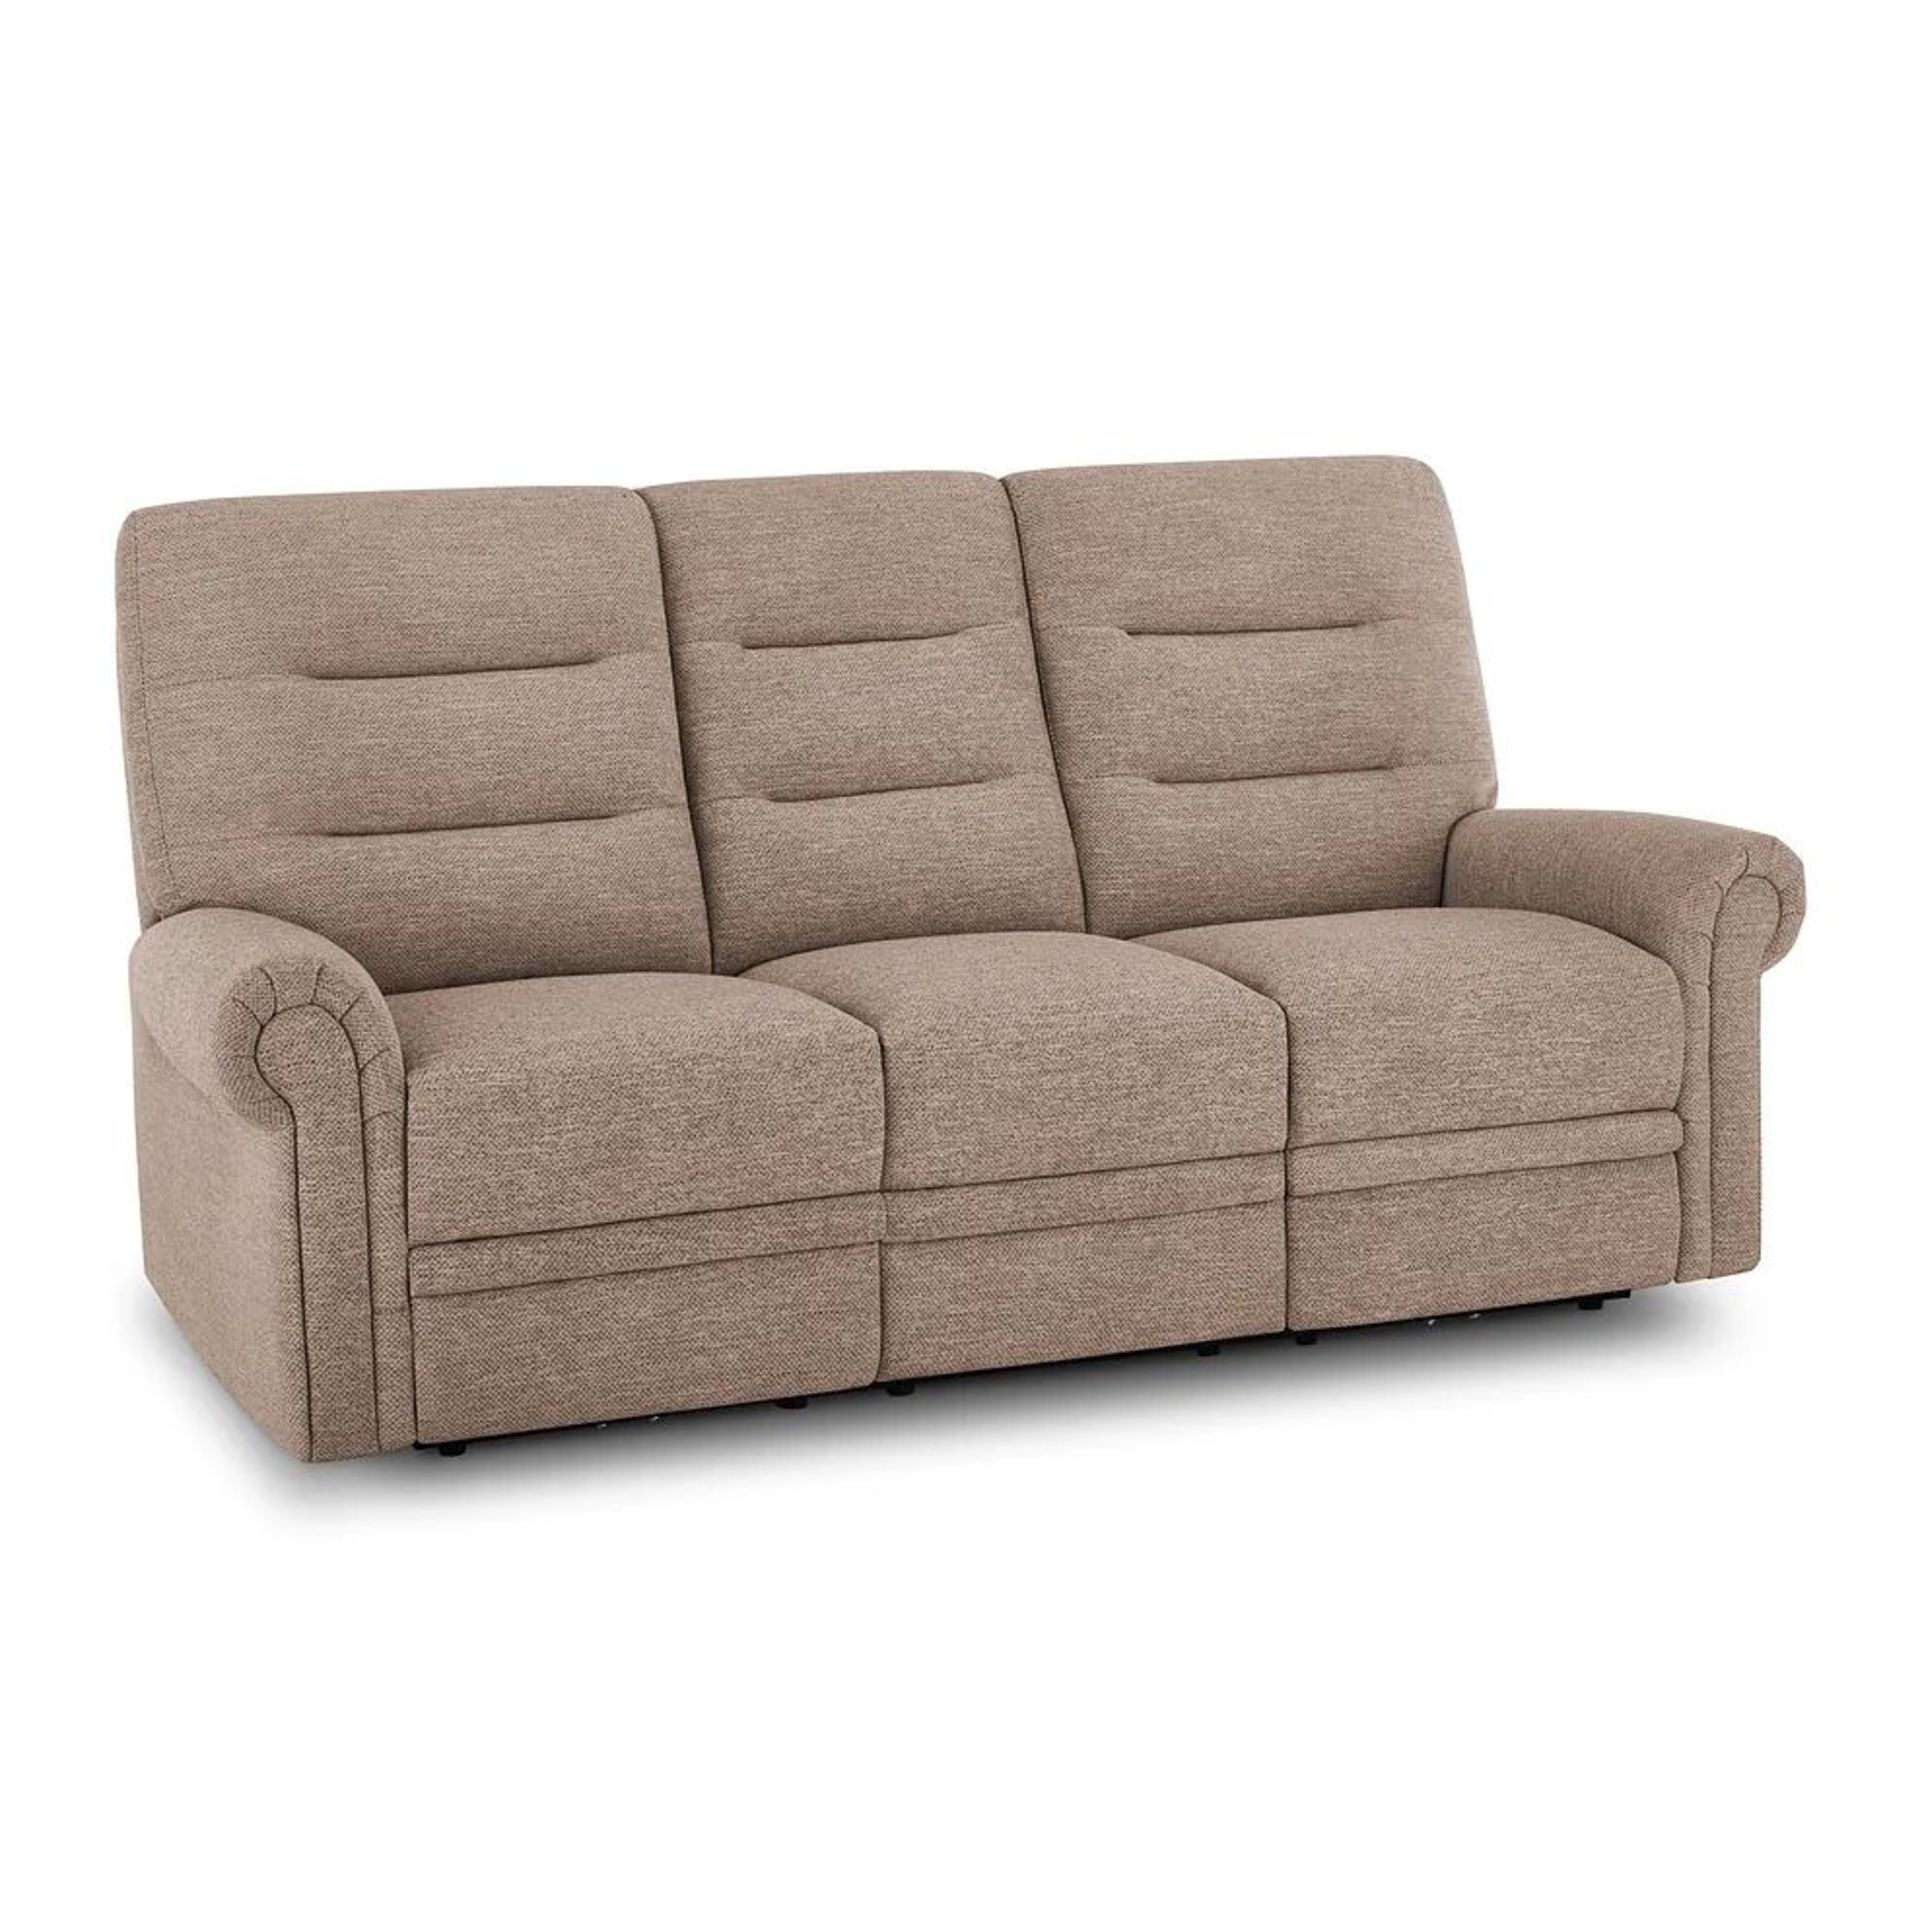 BRAND NEW EASTBOURNE 3 Seater Static Sofa - DORSET BEIGE FABRIC. RRP £1099. Designed with easy